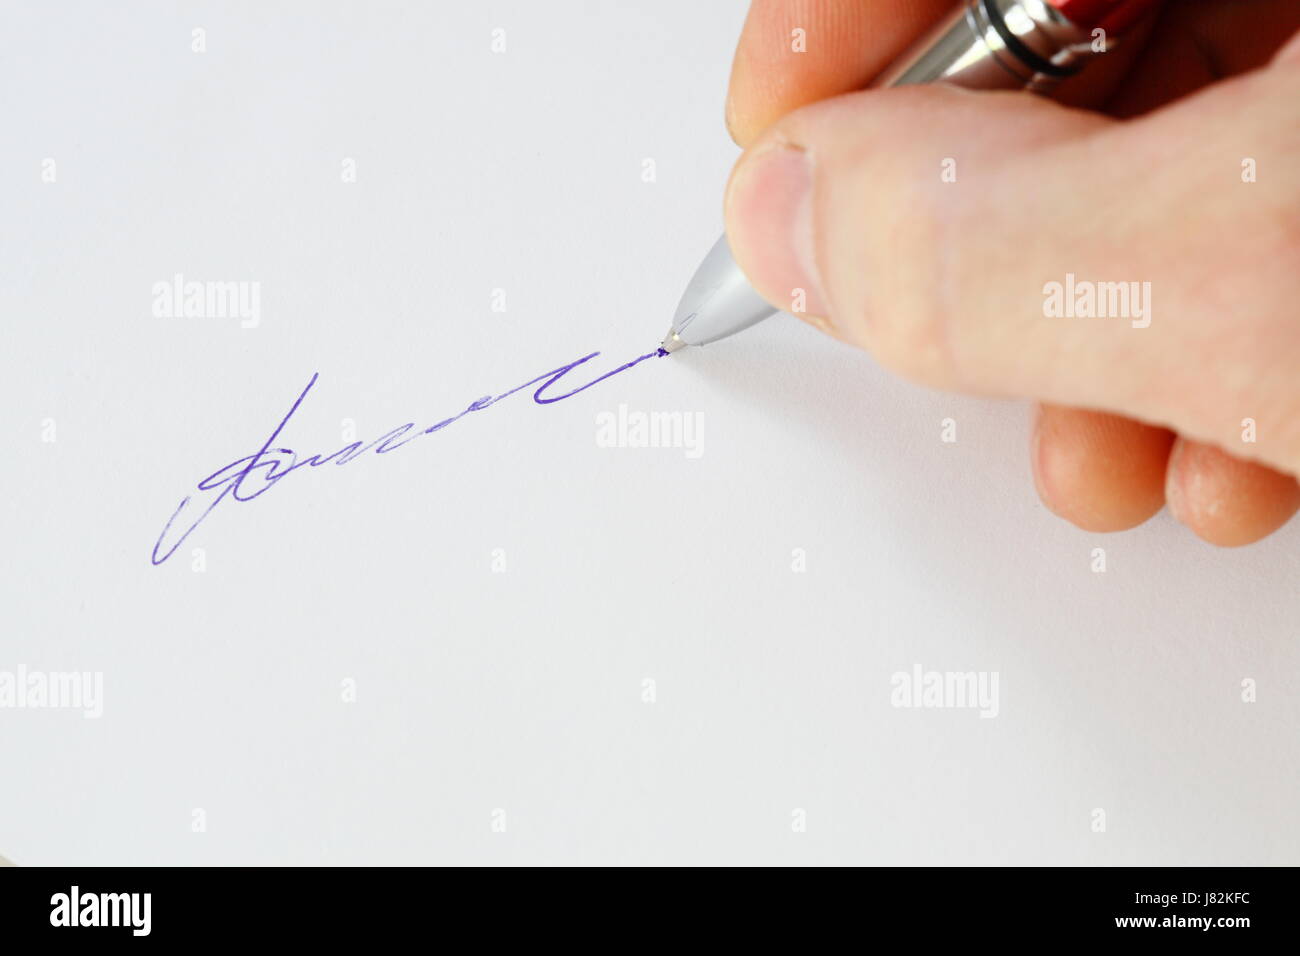 sign signal hand write wrote writing writes contract letter